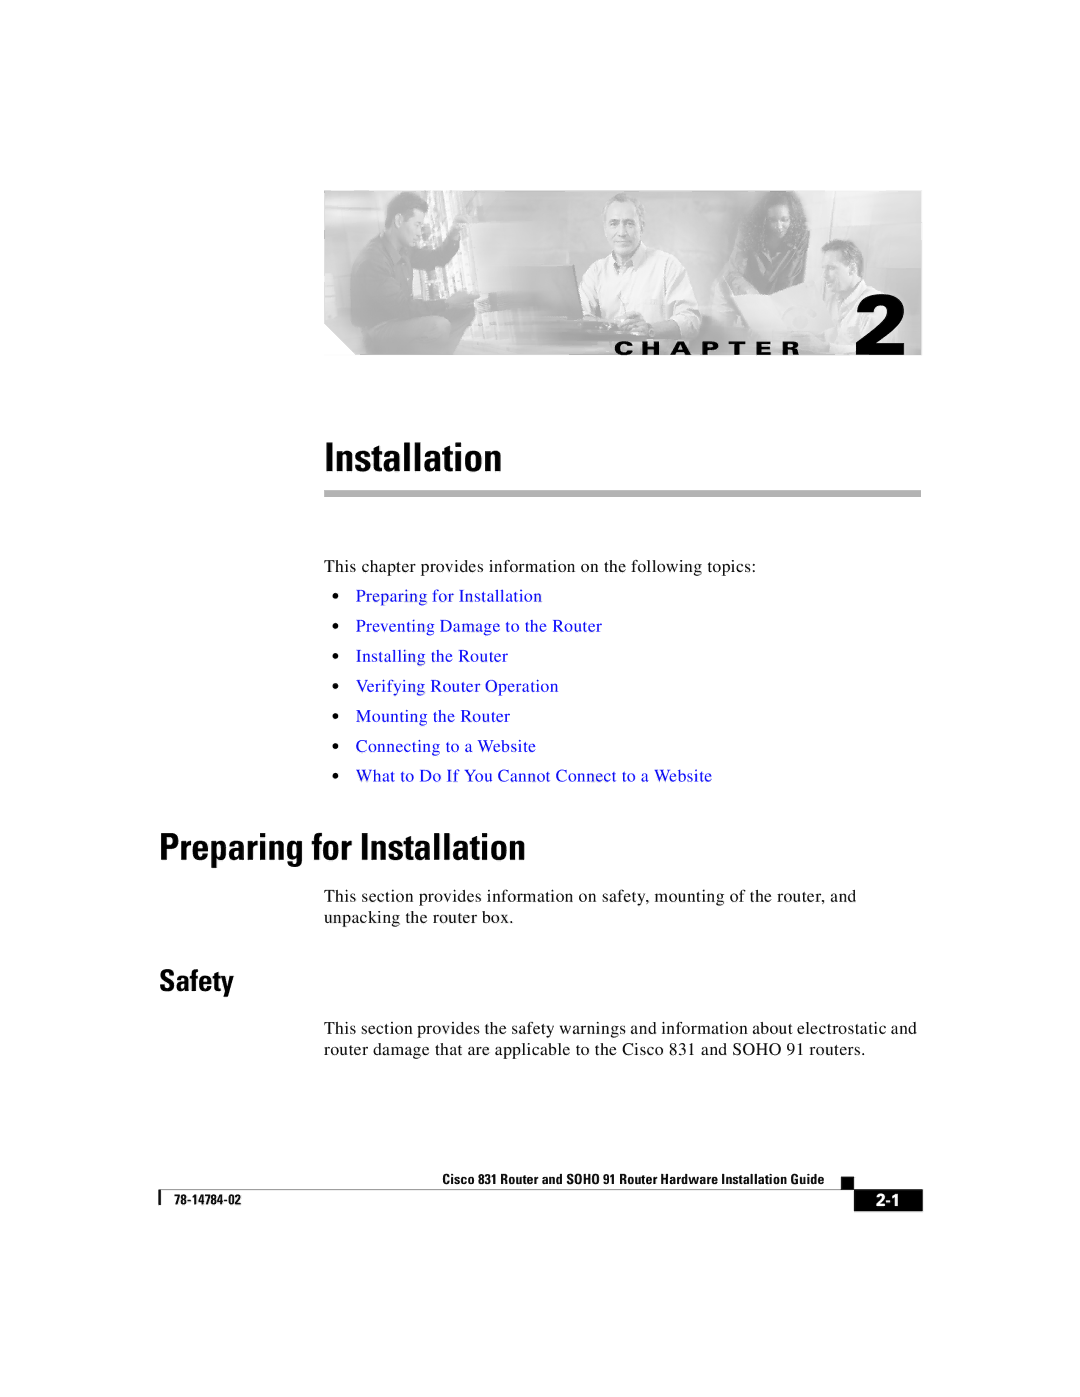 Cisco Systems Cisco 831 manual Preparing for Installation, Safety 